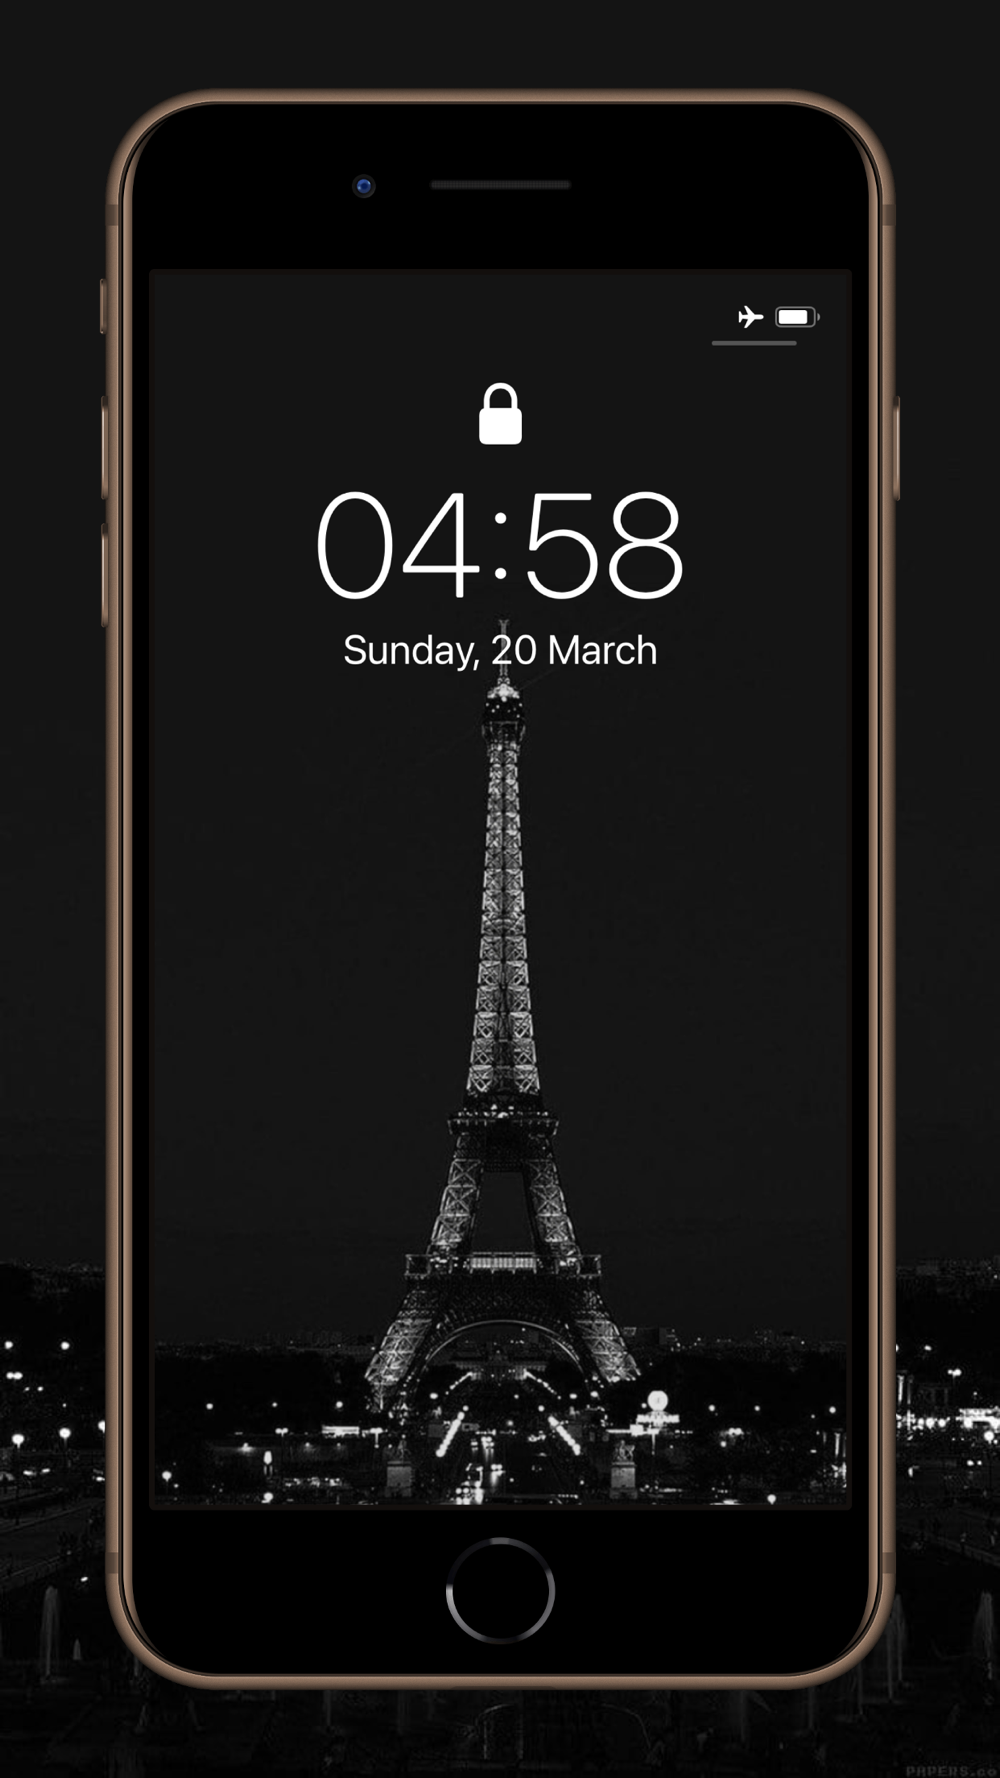 Aesthetic Black Wallpapers Free Download App for iPhone 